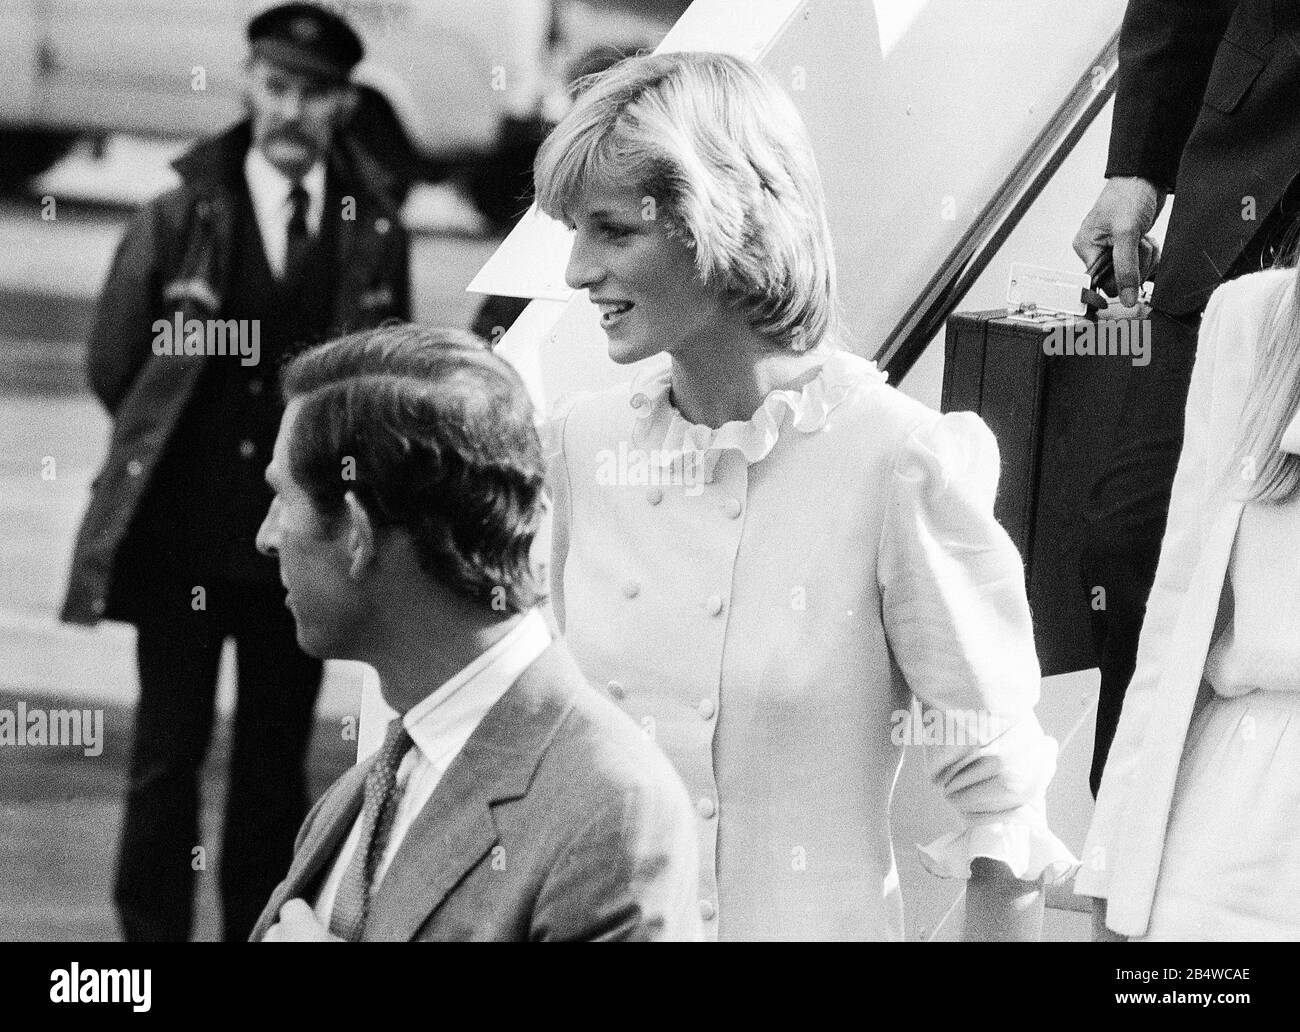 The Prince and Princess of Wales return to London in April 1986. Stock Photo